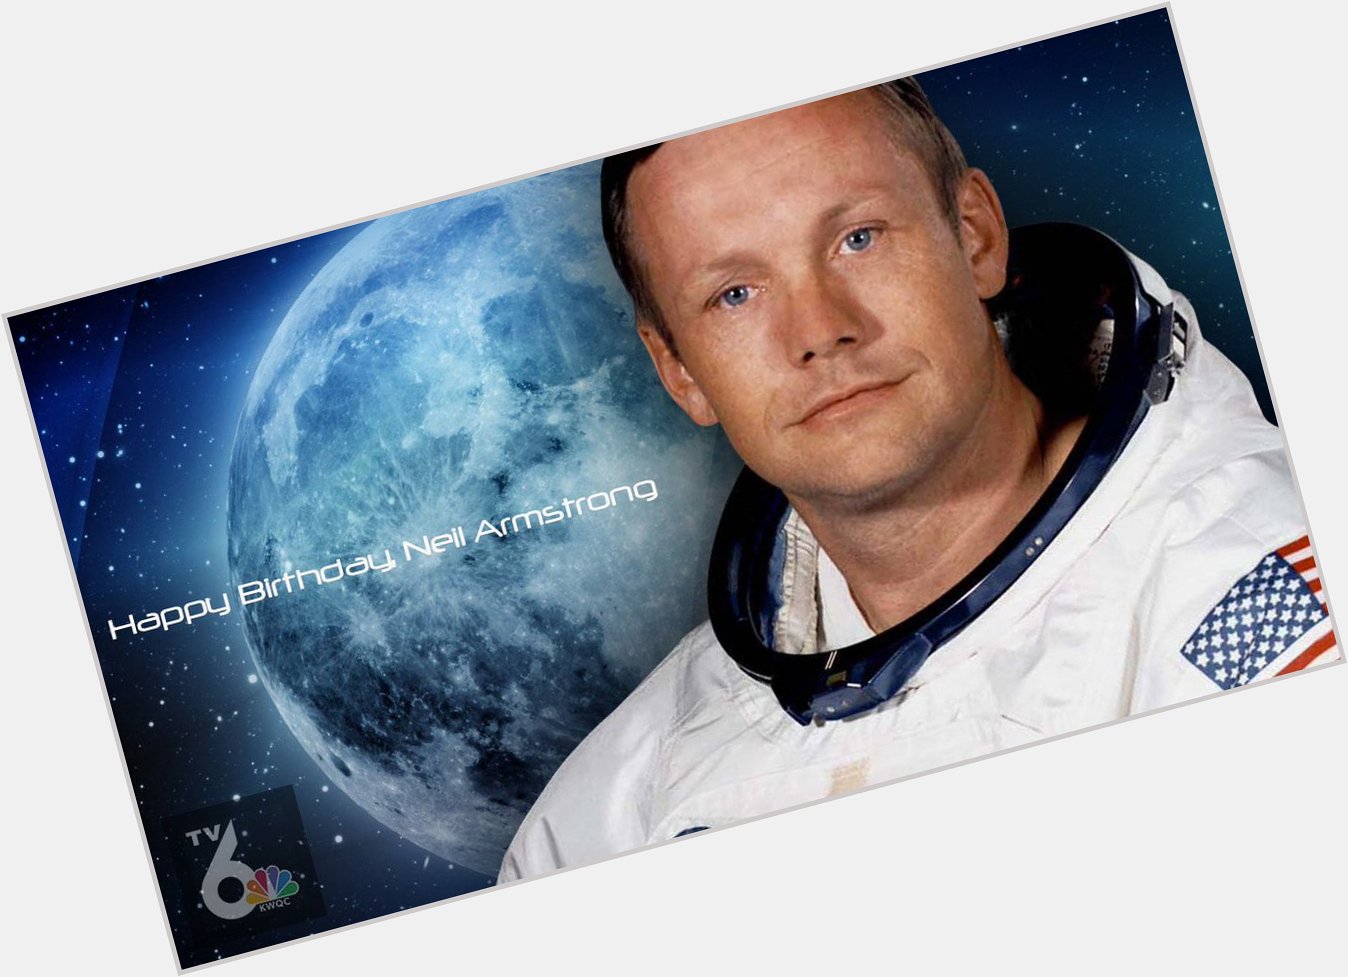 Happy Birthday, Neil Armstrong!
\"This is one small step for a man, one giant leap for mankind.\" 